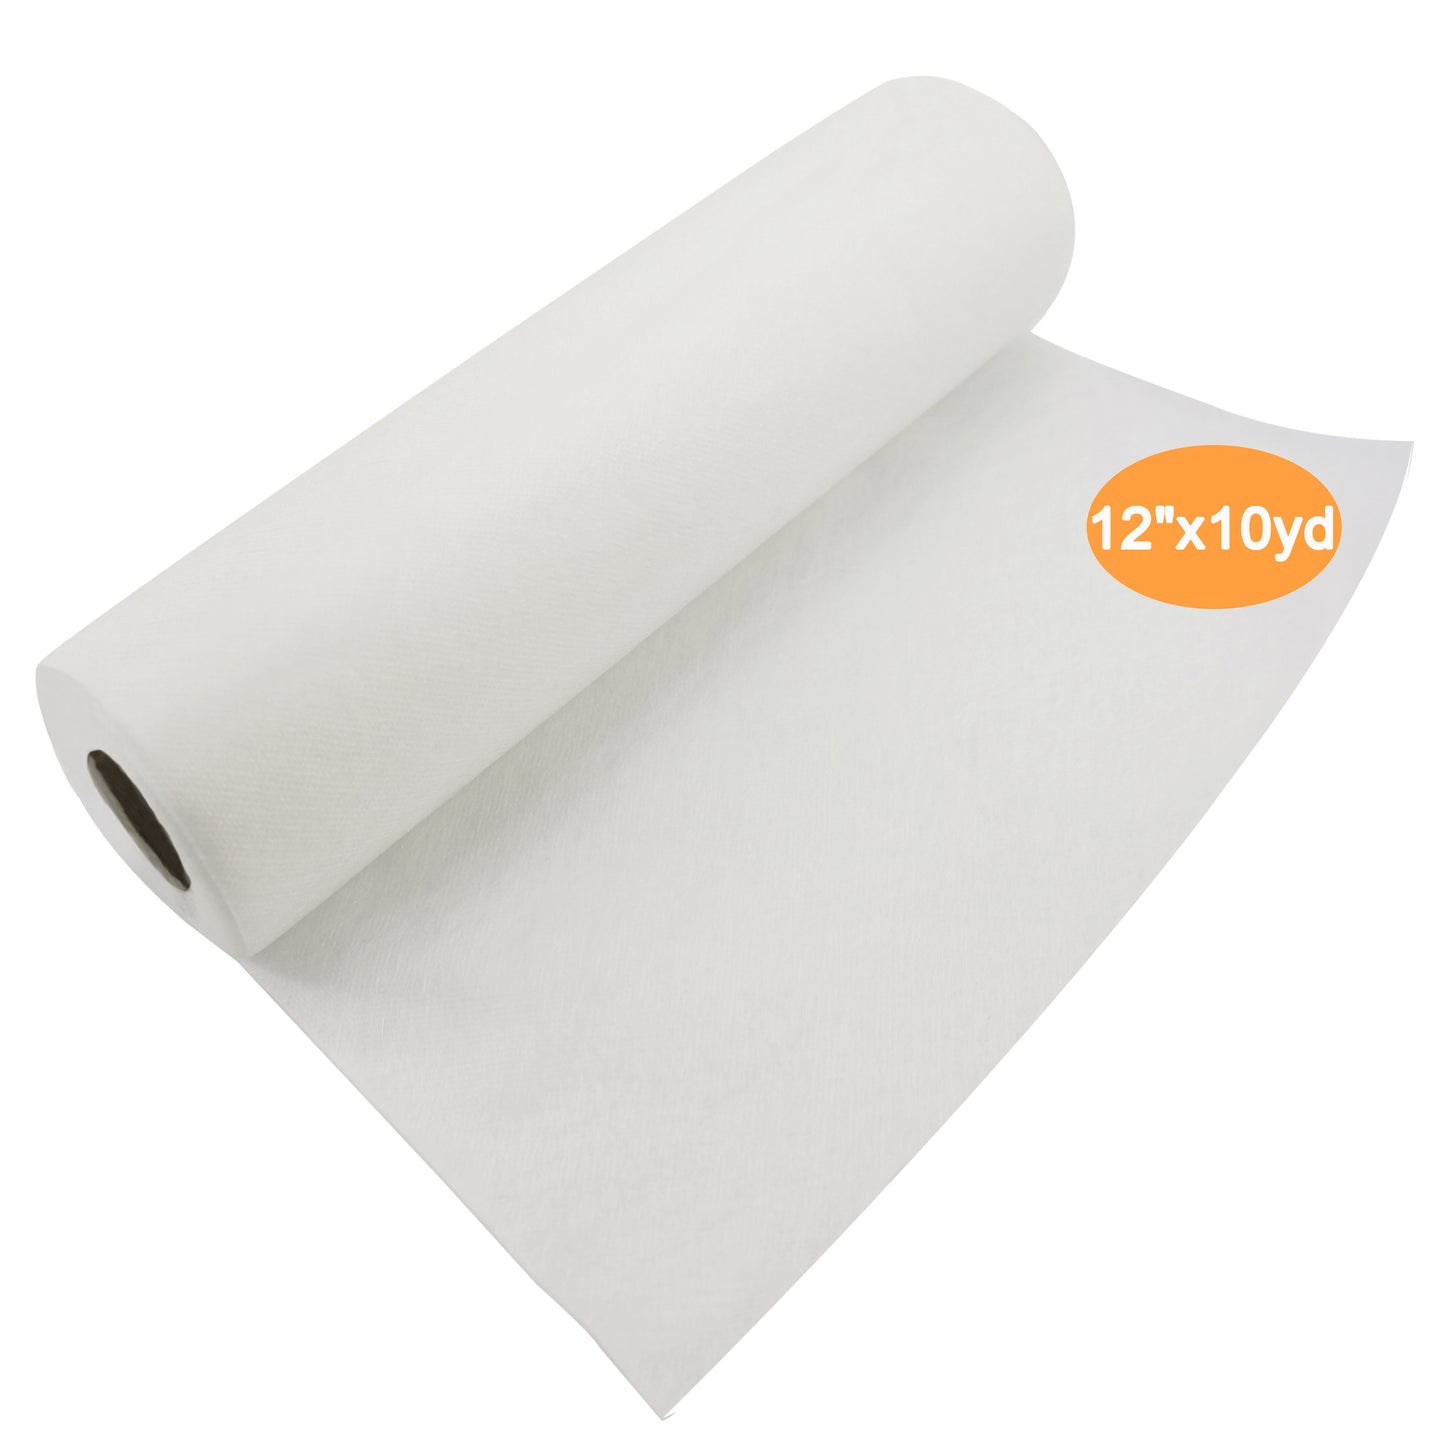  100 Sheets Wash Away Embroidery Stabilizer Water Soluble  Embroidery Topping Film Transparent Water Soluble Stabilizer for Embroidery  and Topping (12 x 10 Inch/ 30 x 25 cm)